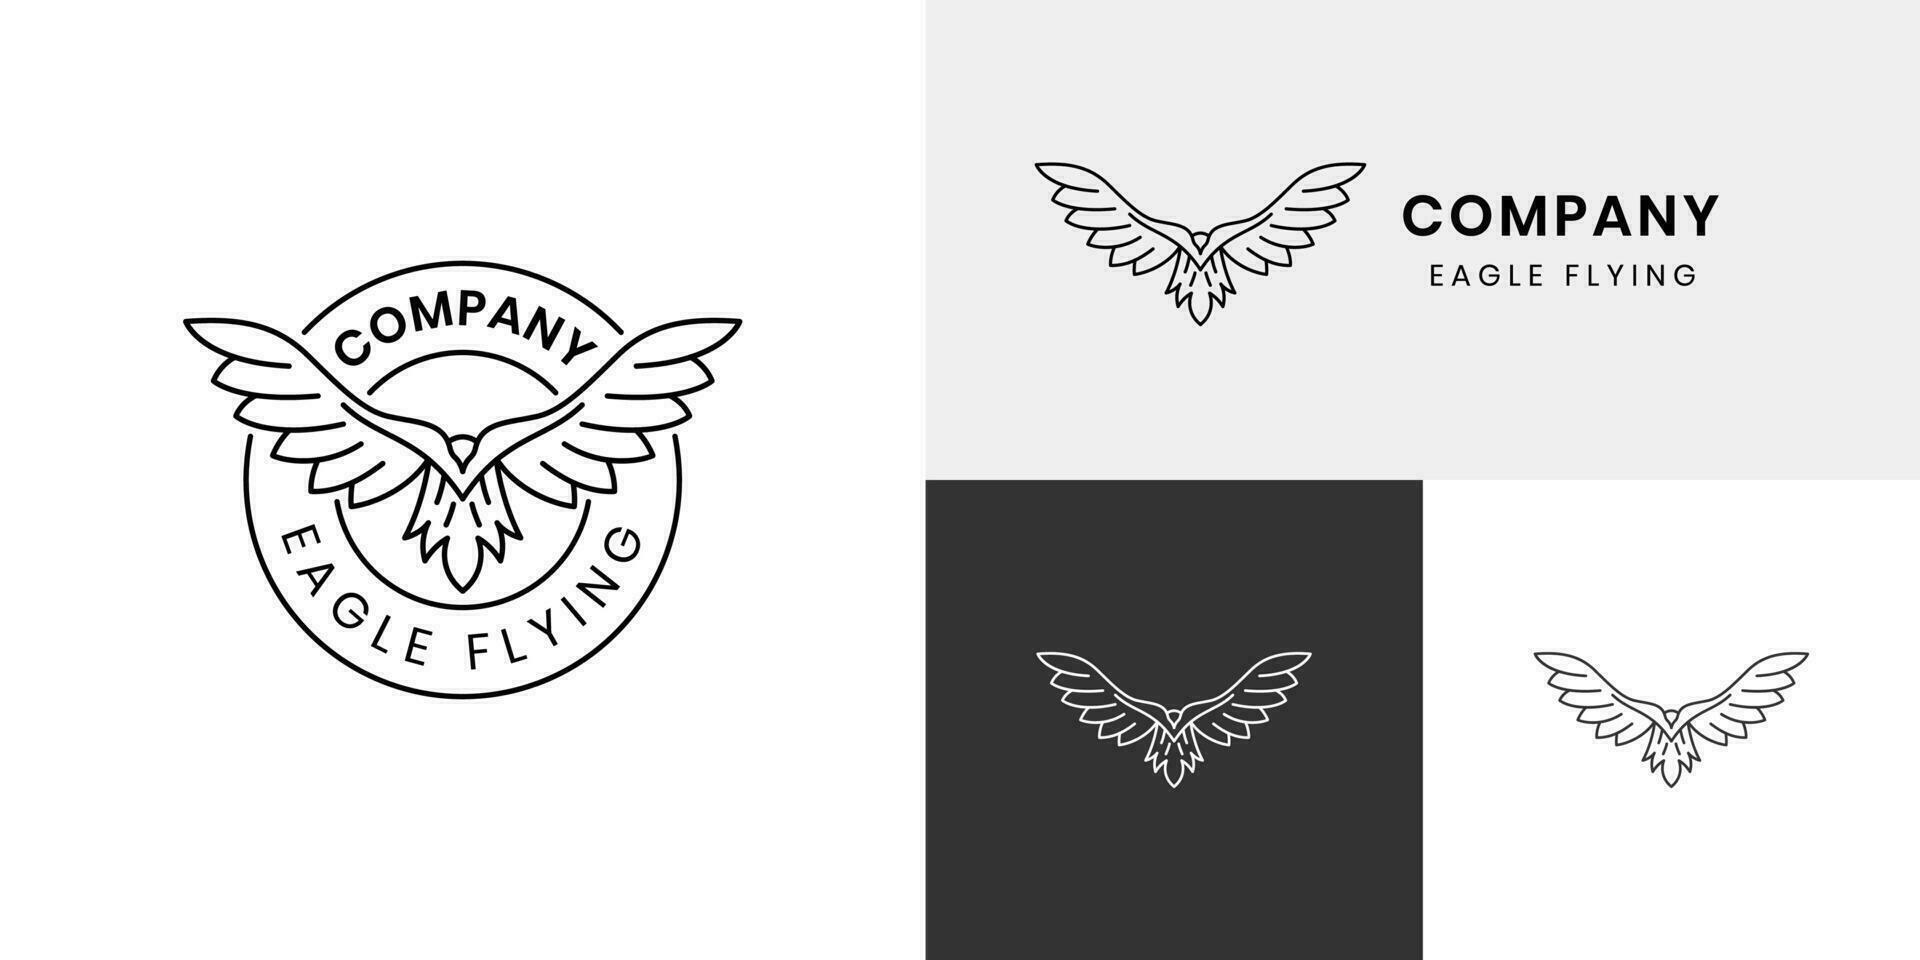 awesome phoenix wings gradient logo illustration and black silhouette bird eagle logo design vector